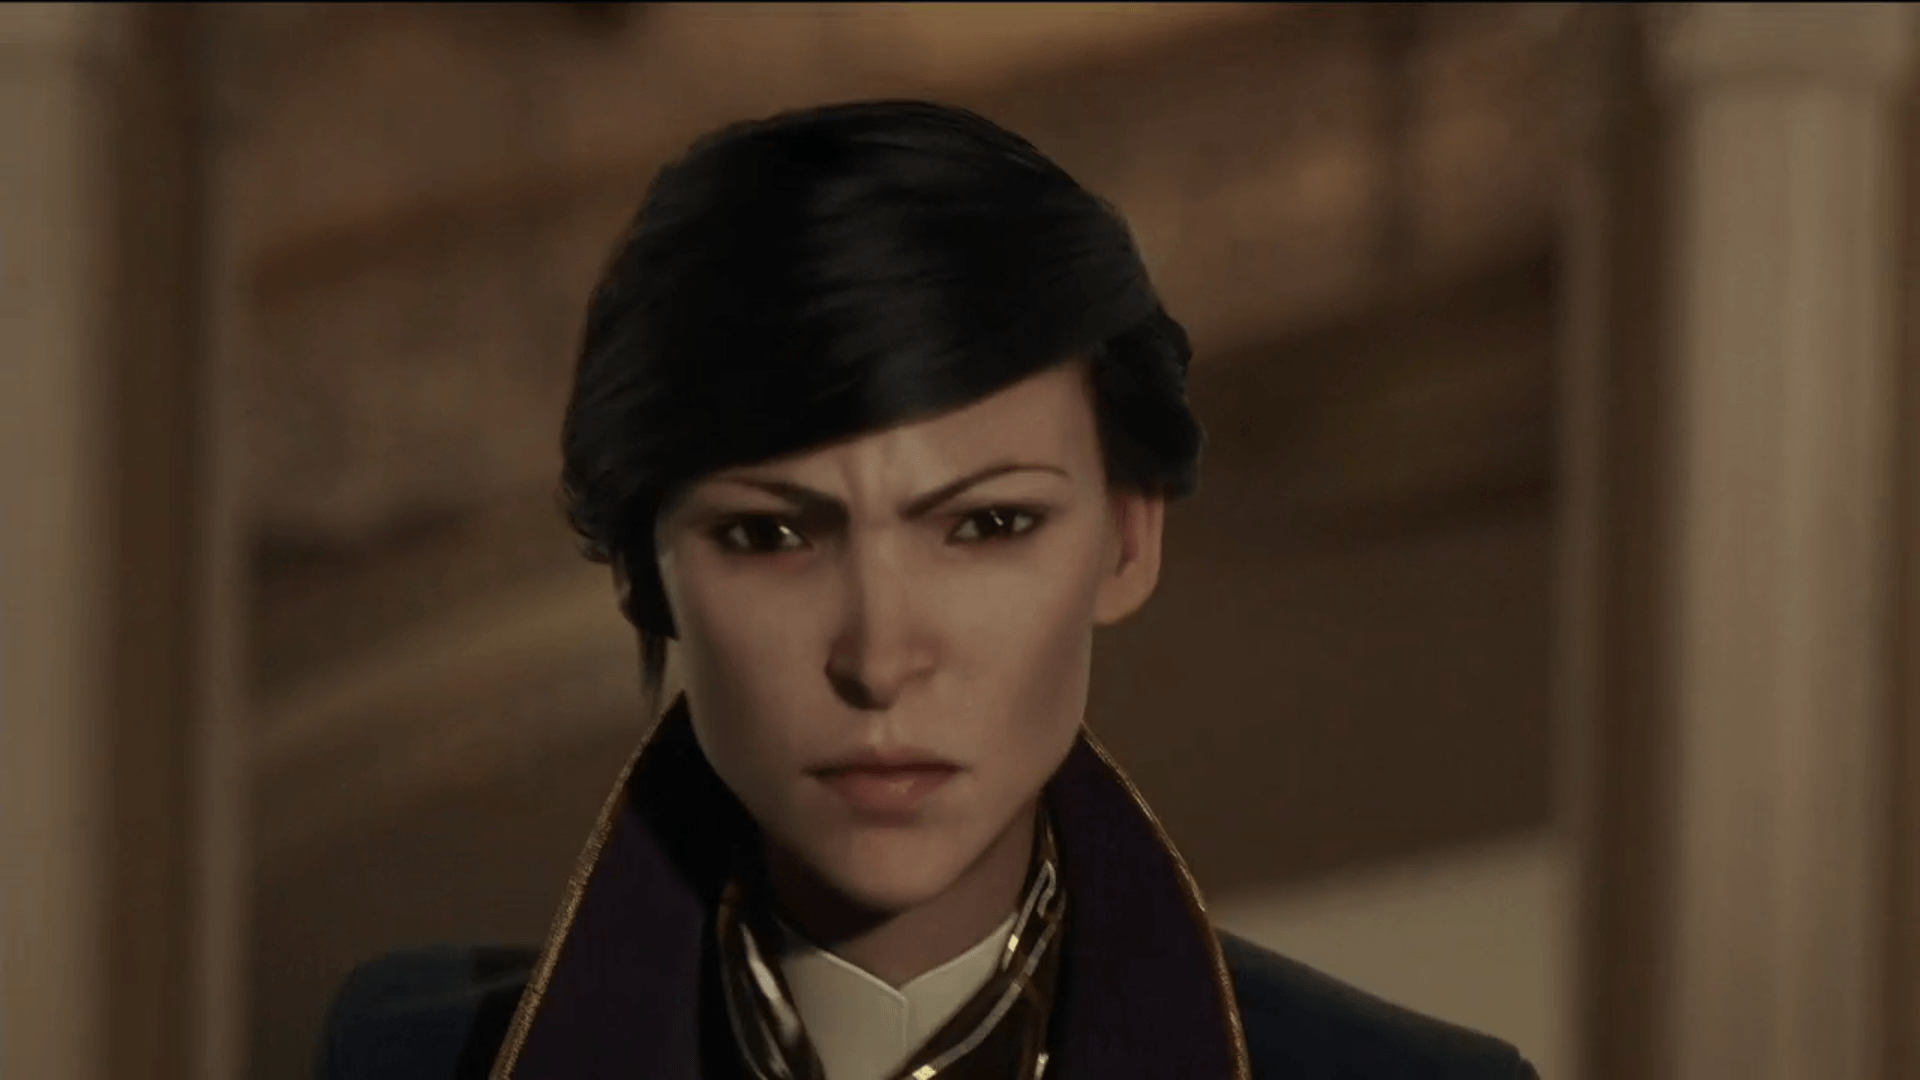 Dishonored 2 Video Explains Who Emily Kaldwin Is and Showcases Her